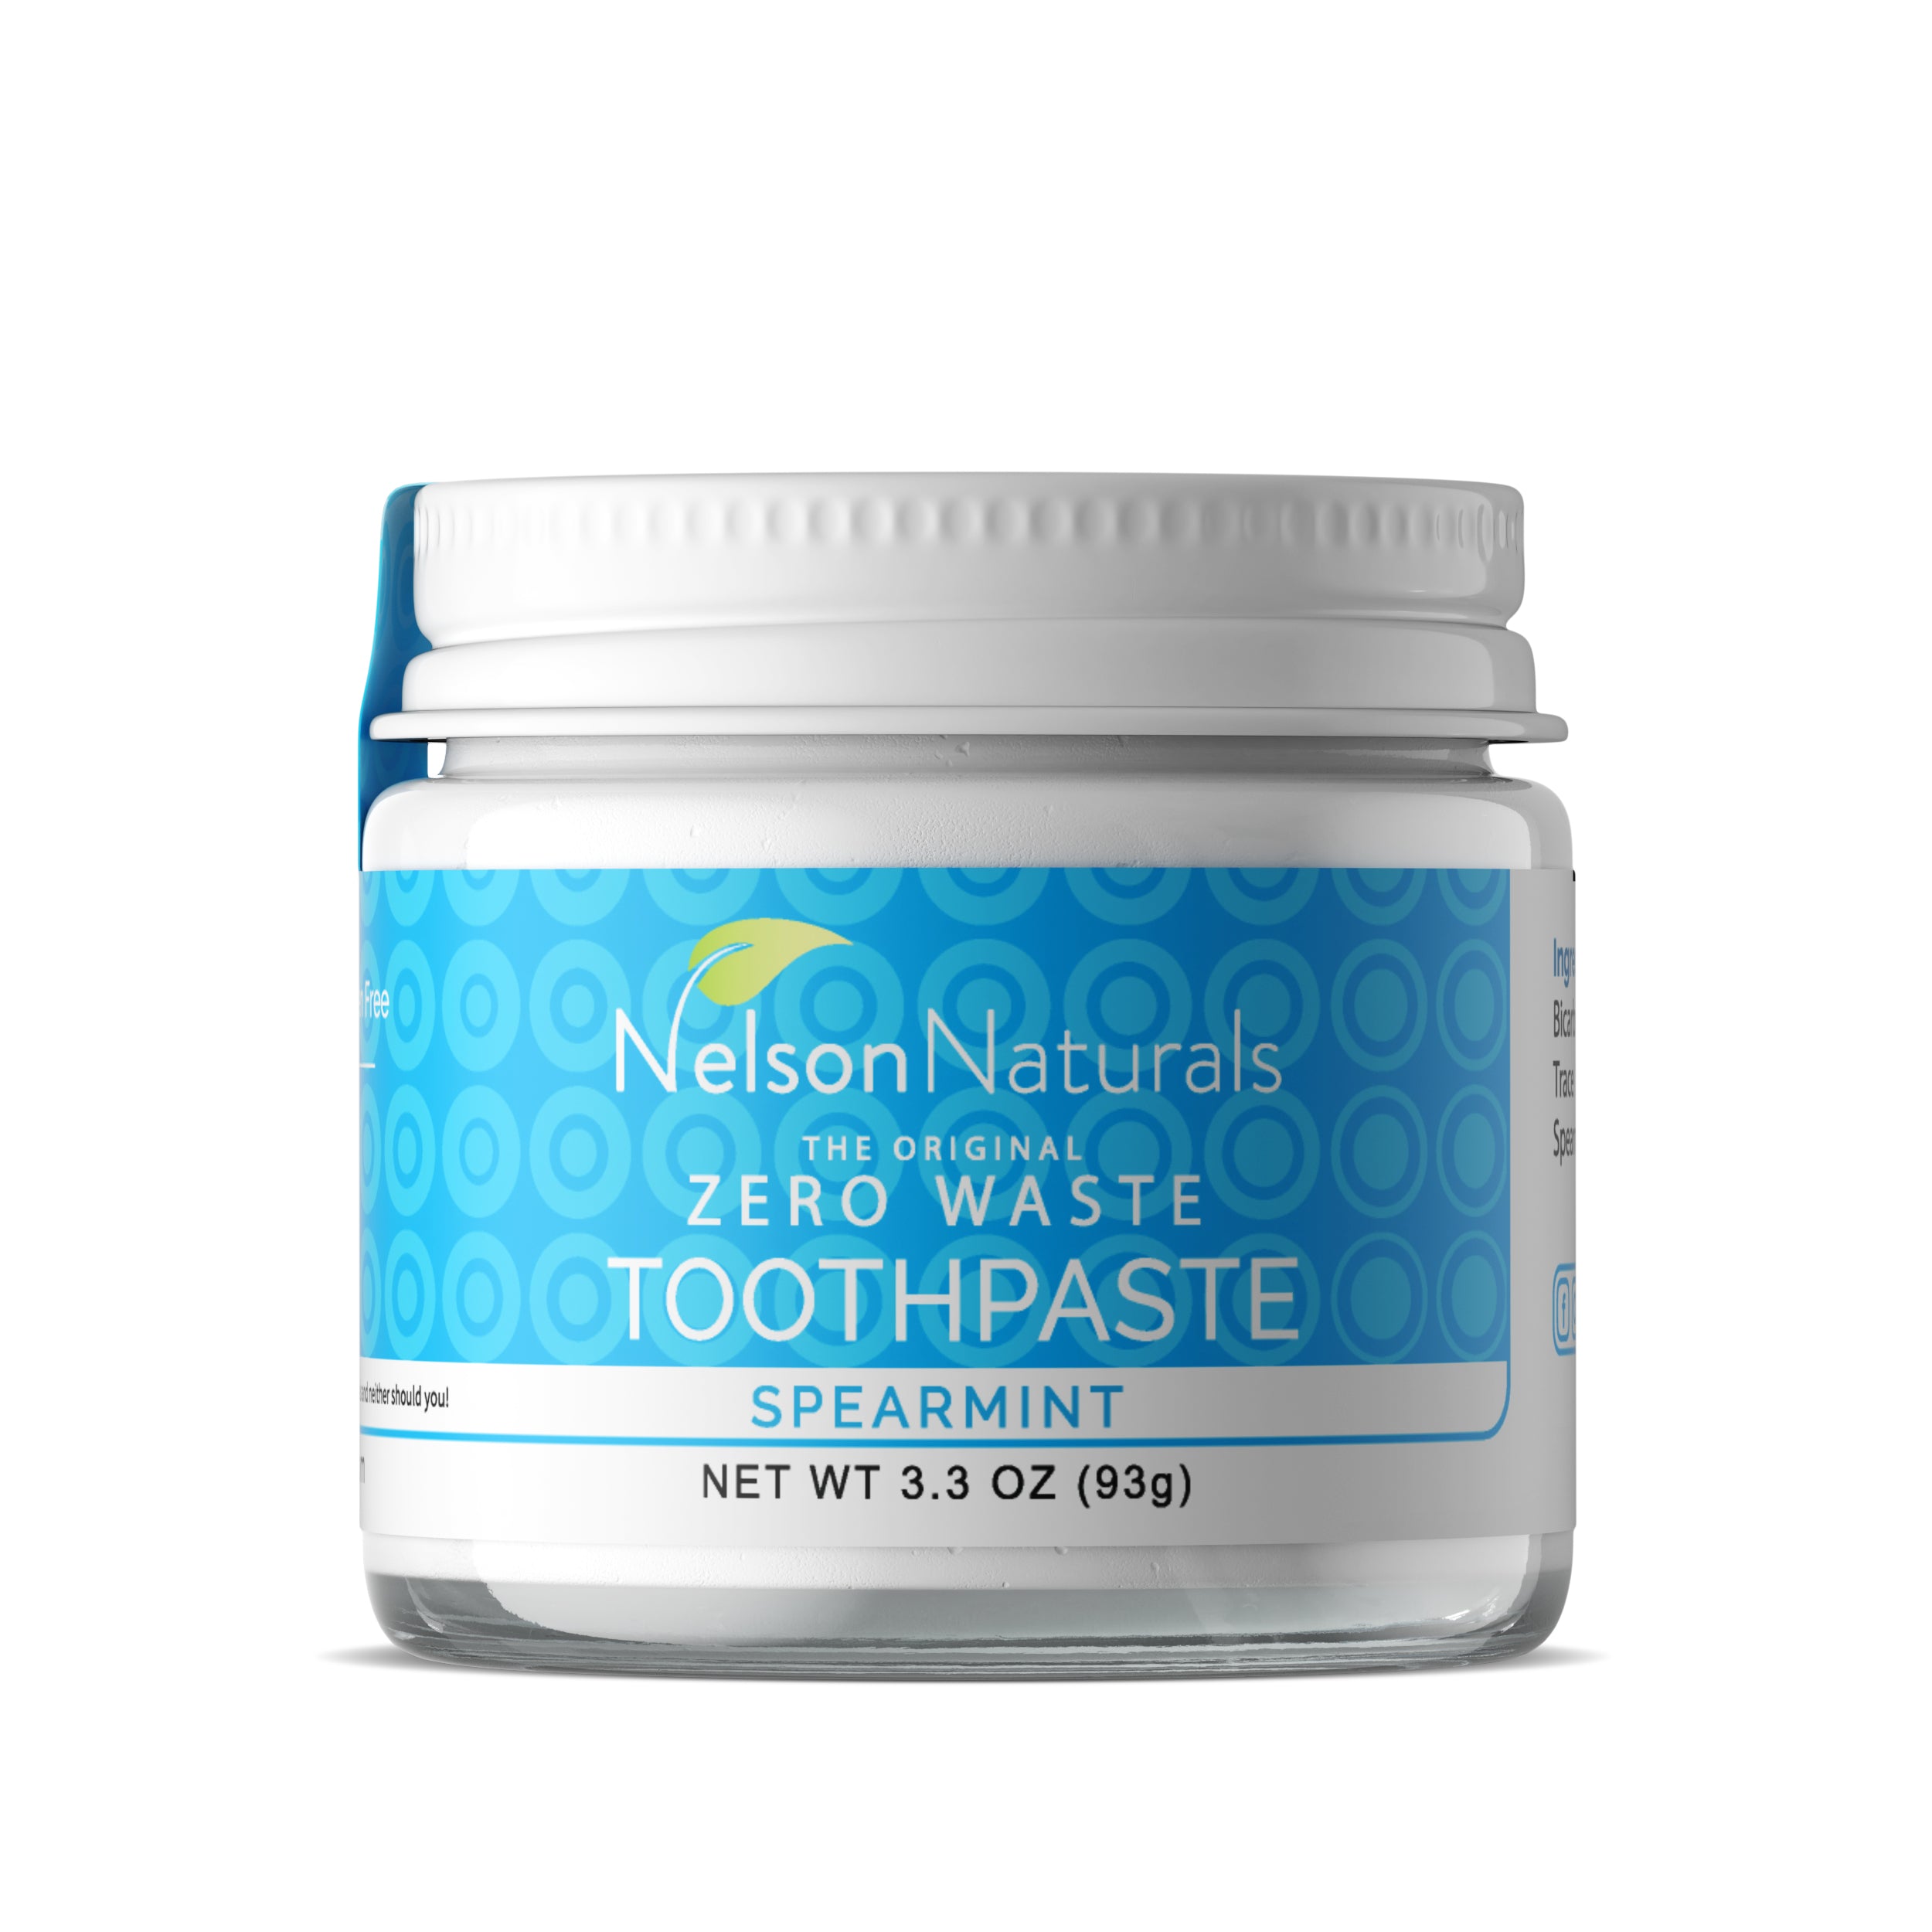 Spearmint 93g Toothpaste - nelsonnaturals remineralizing toothpaste